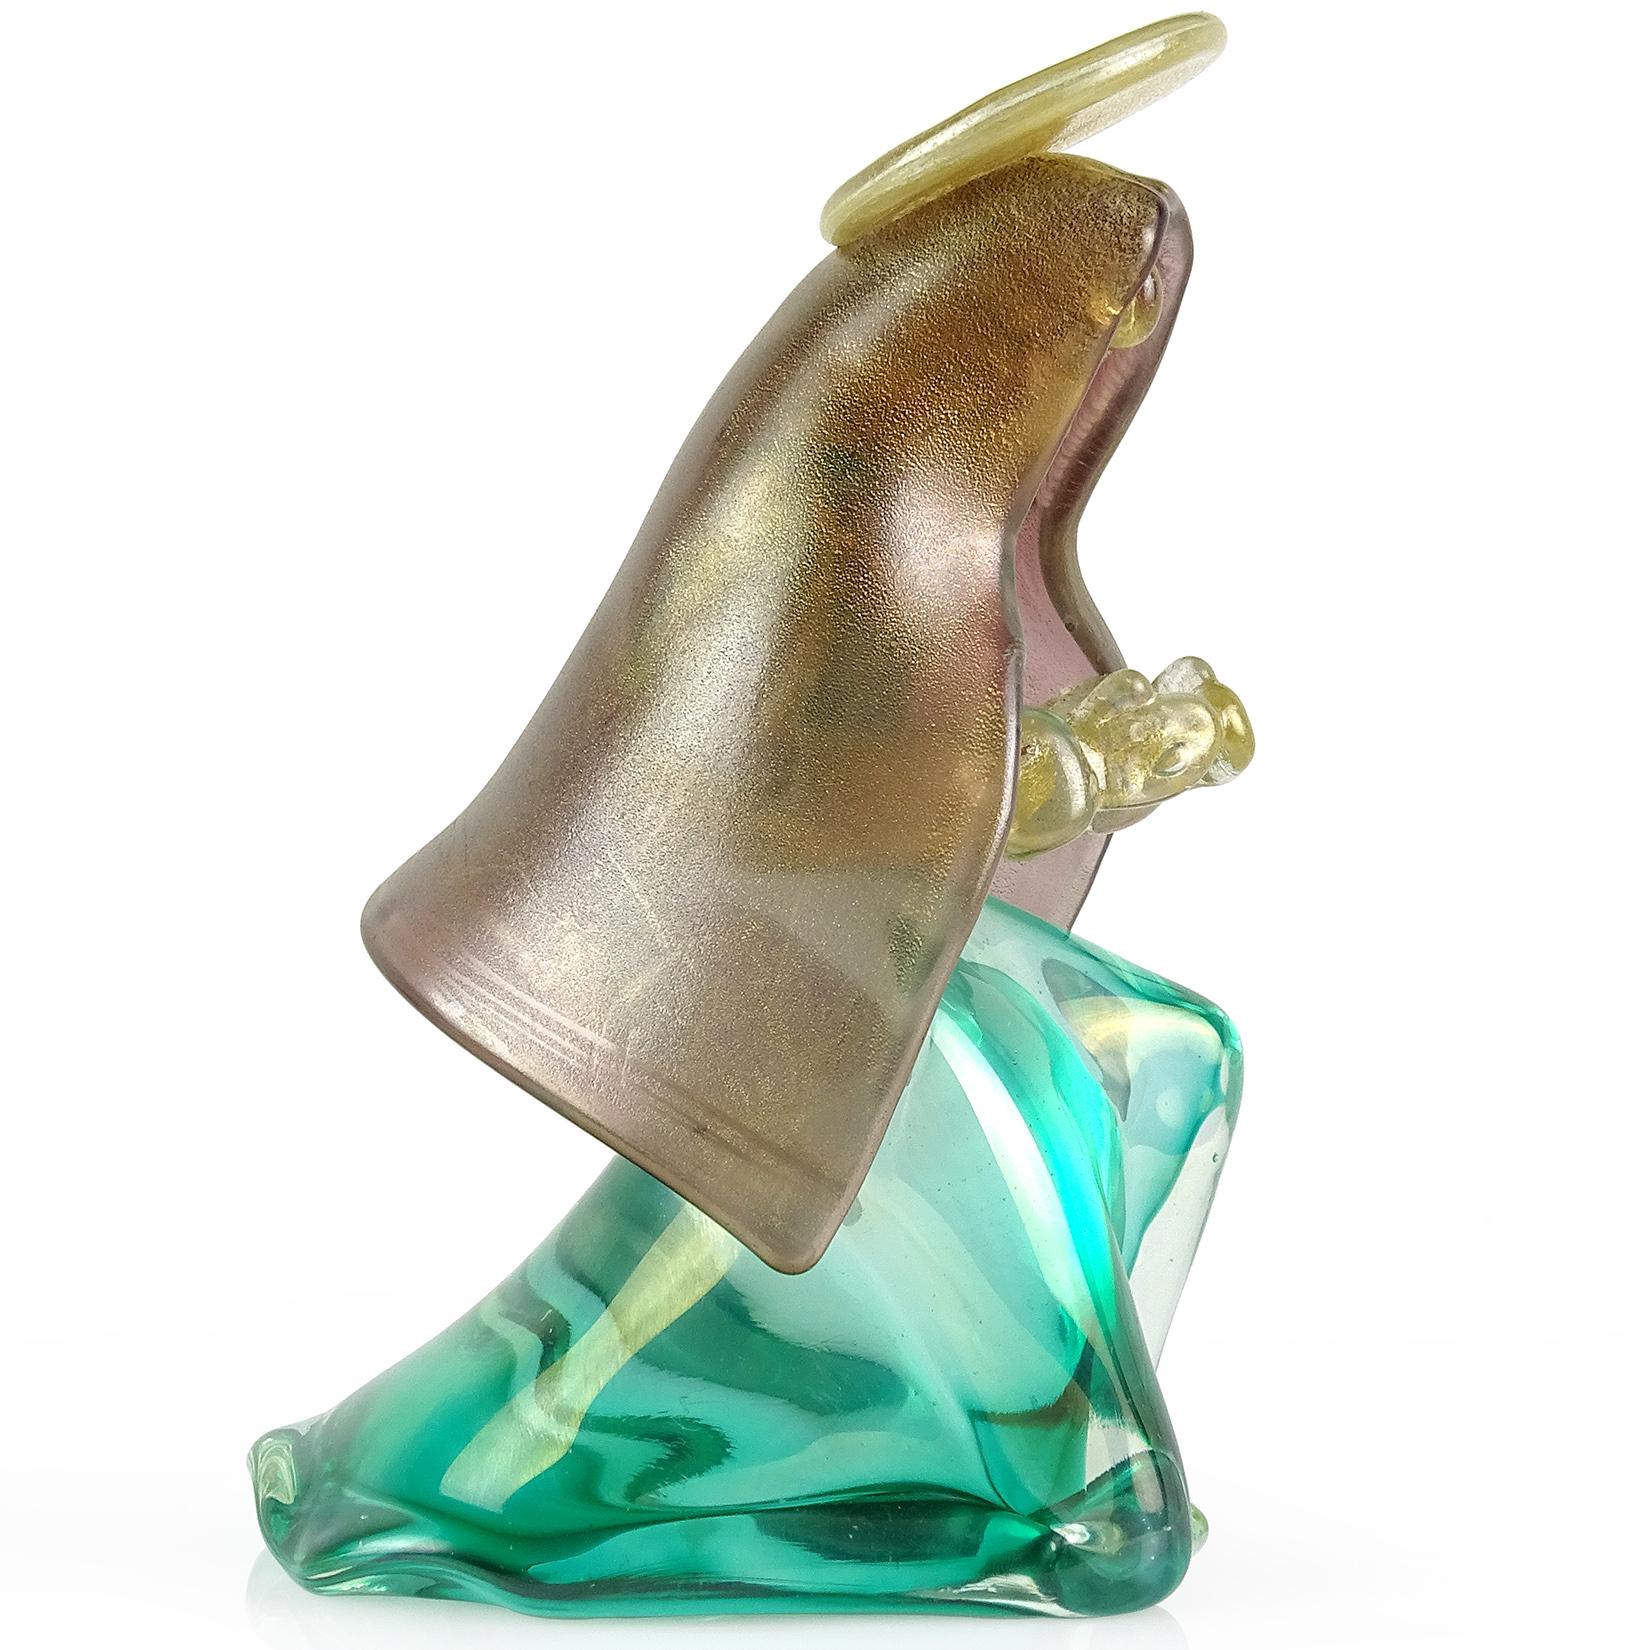 Beautiful and rare, vintage Murano hand blown iridescent green, with purple veil Italian art glass Virgin Mary nativity figure, sculpture. Attributed to designer Archimede Seguso. She is barefoot and kneeling, with hands clasped. Her purple veil has